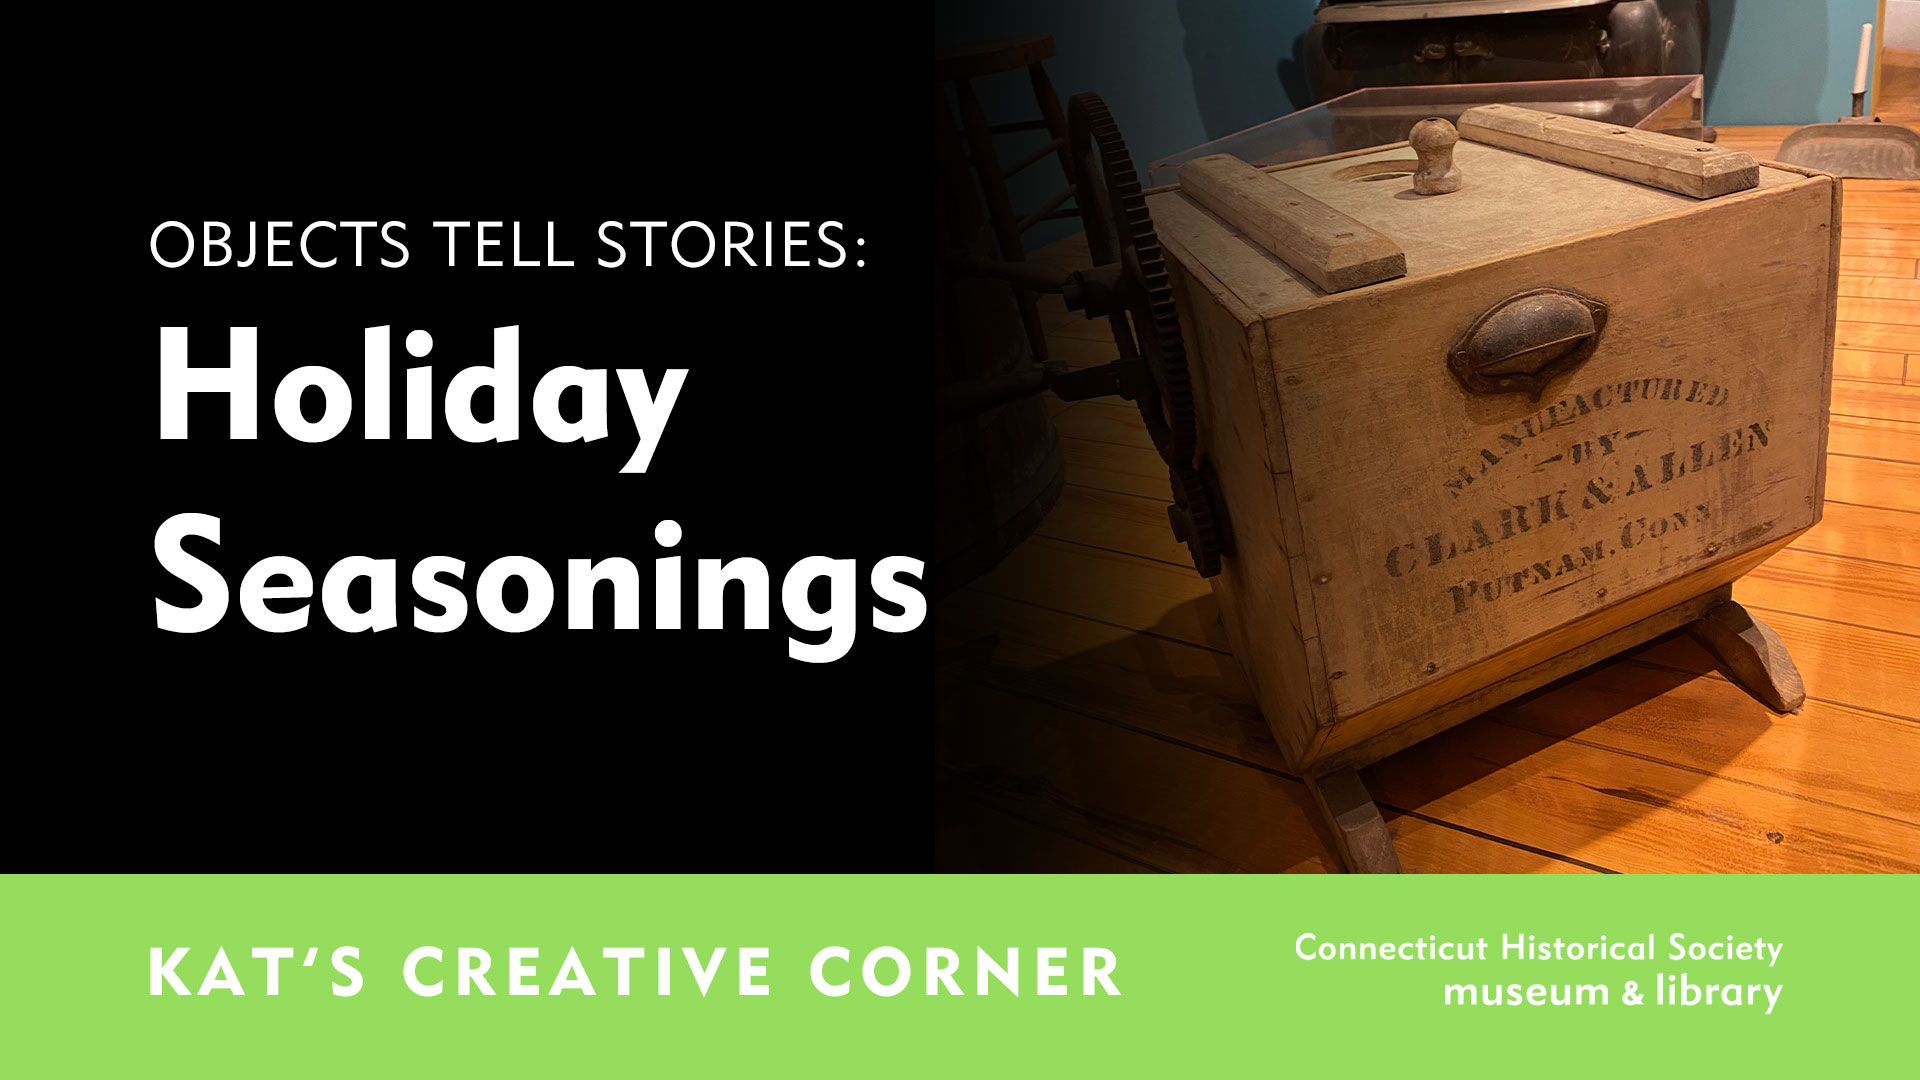 Objects Tell Stories: Holiday Seasonings